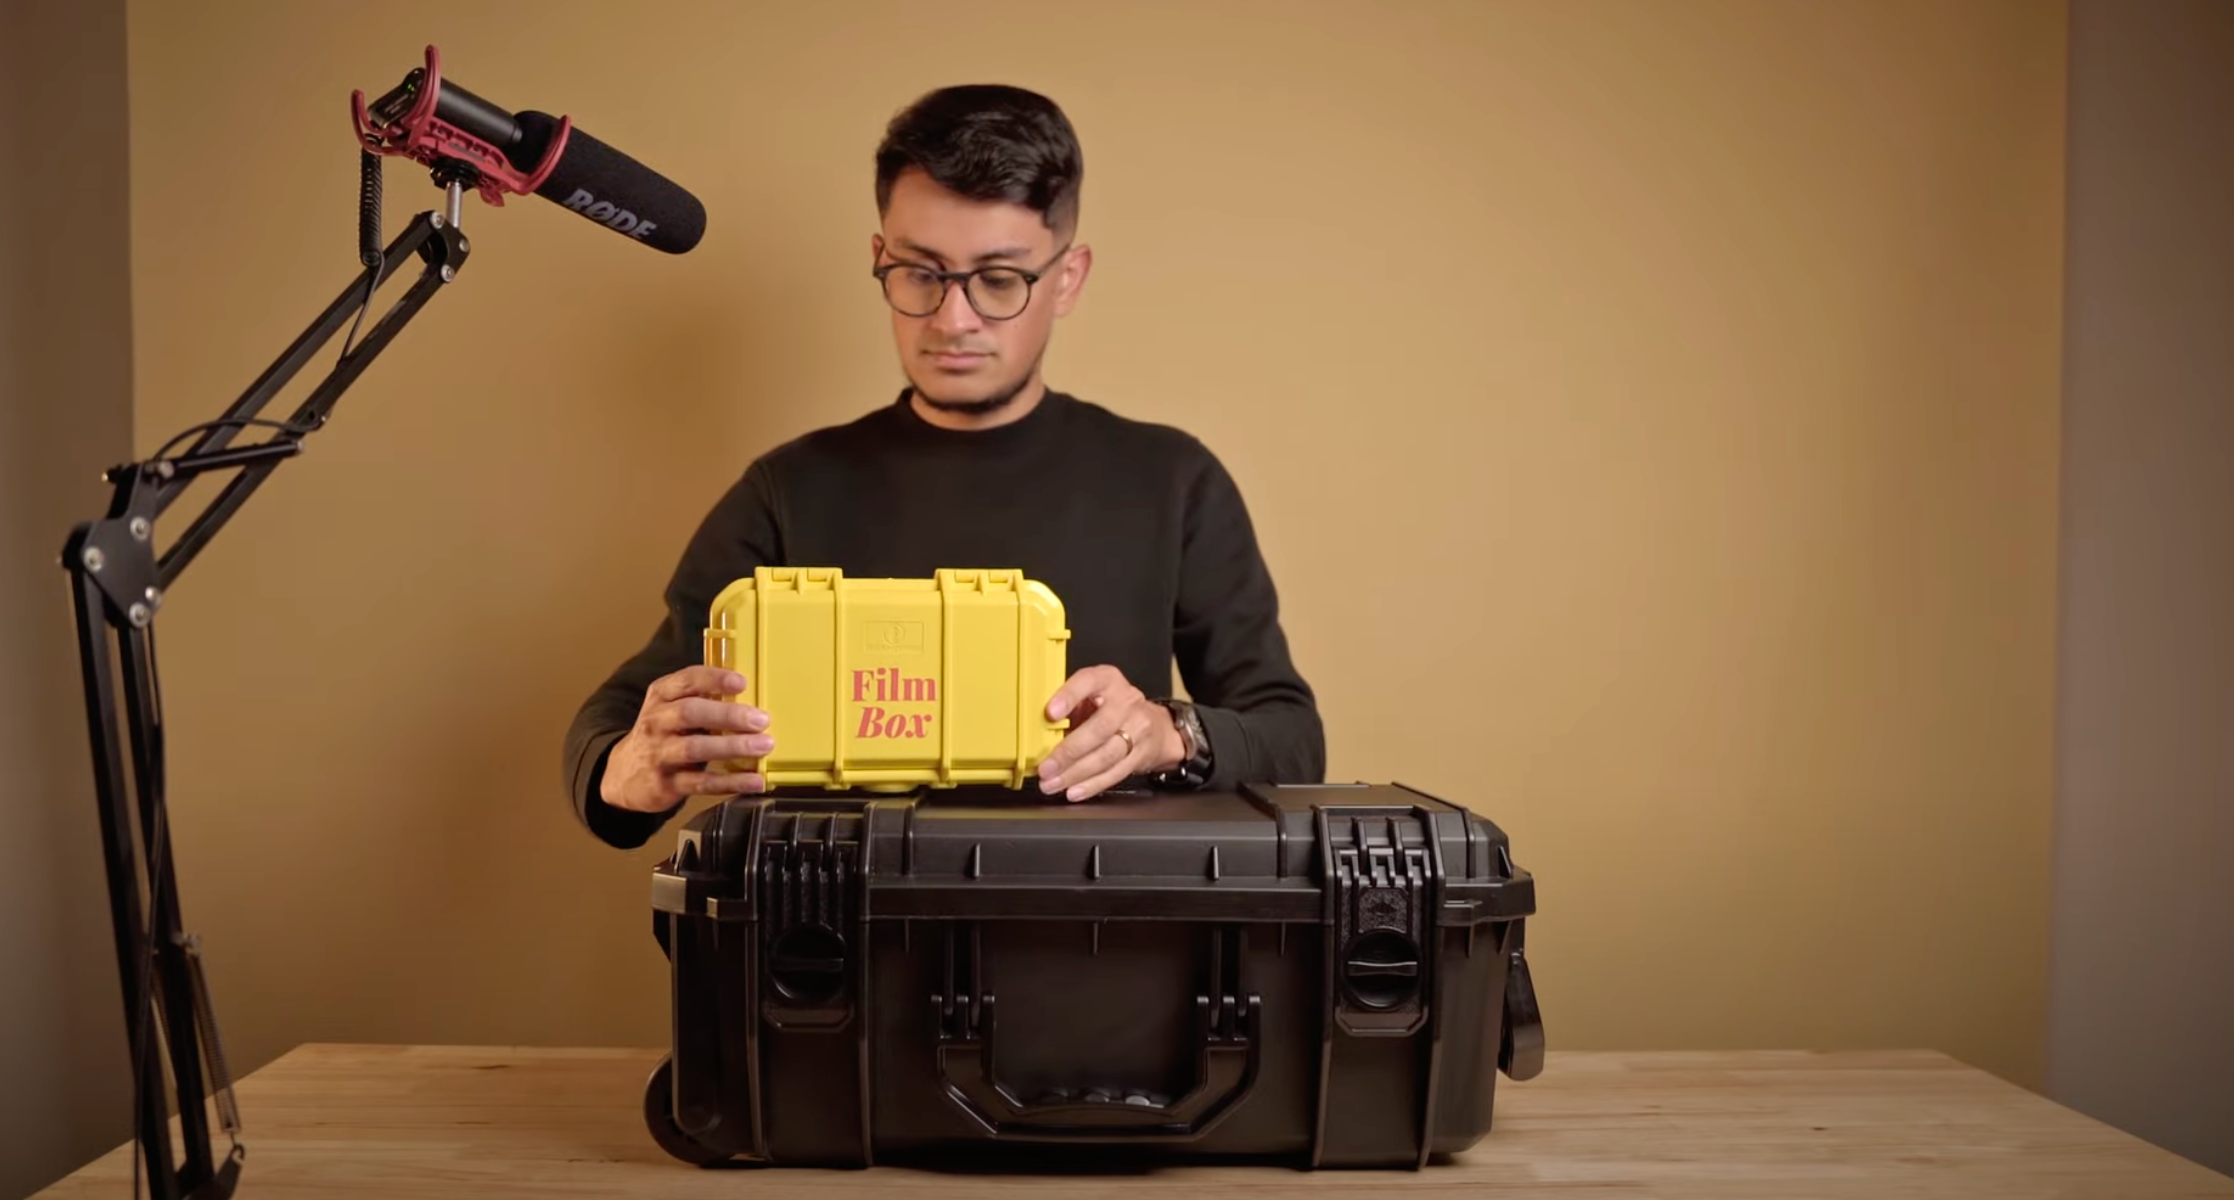 You need this to protect your camera gear and film